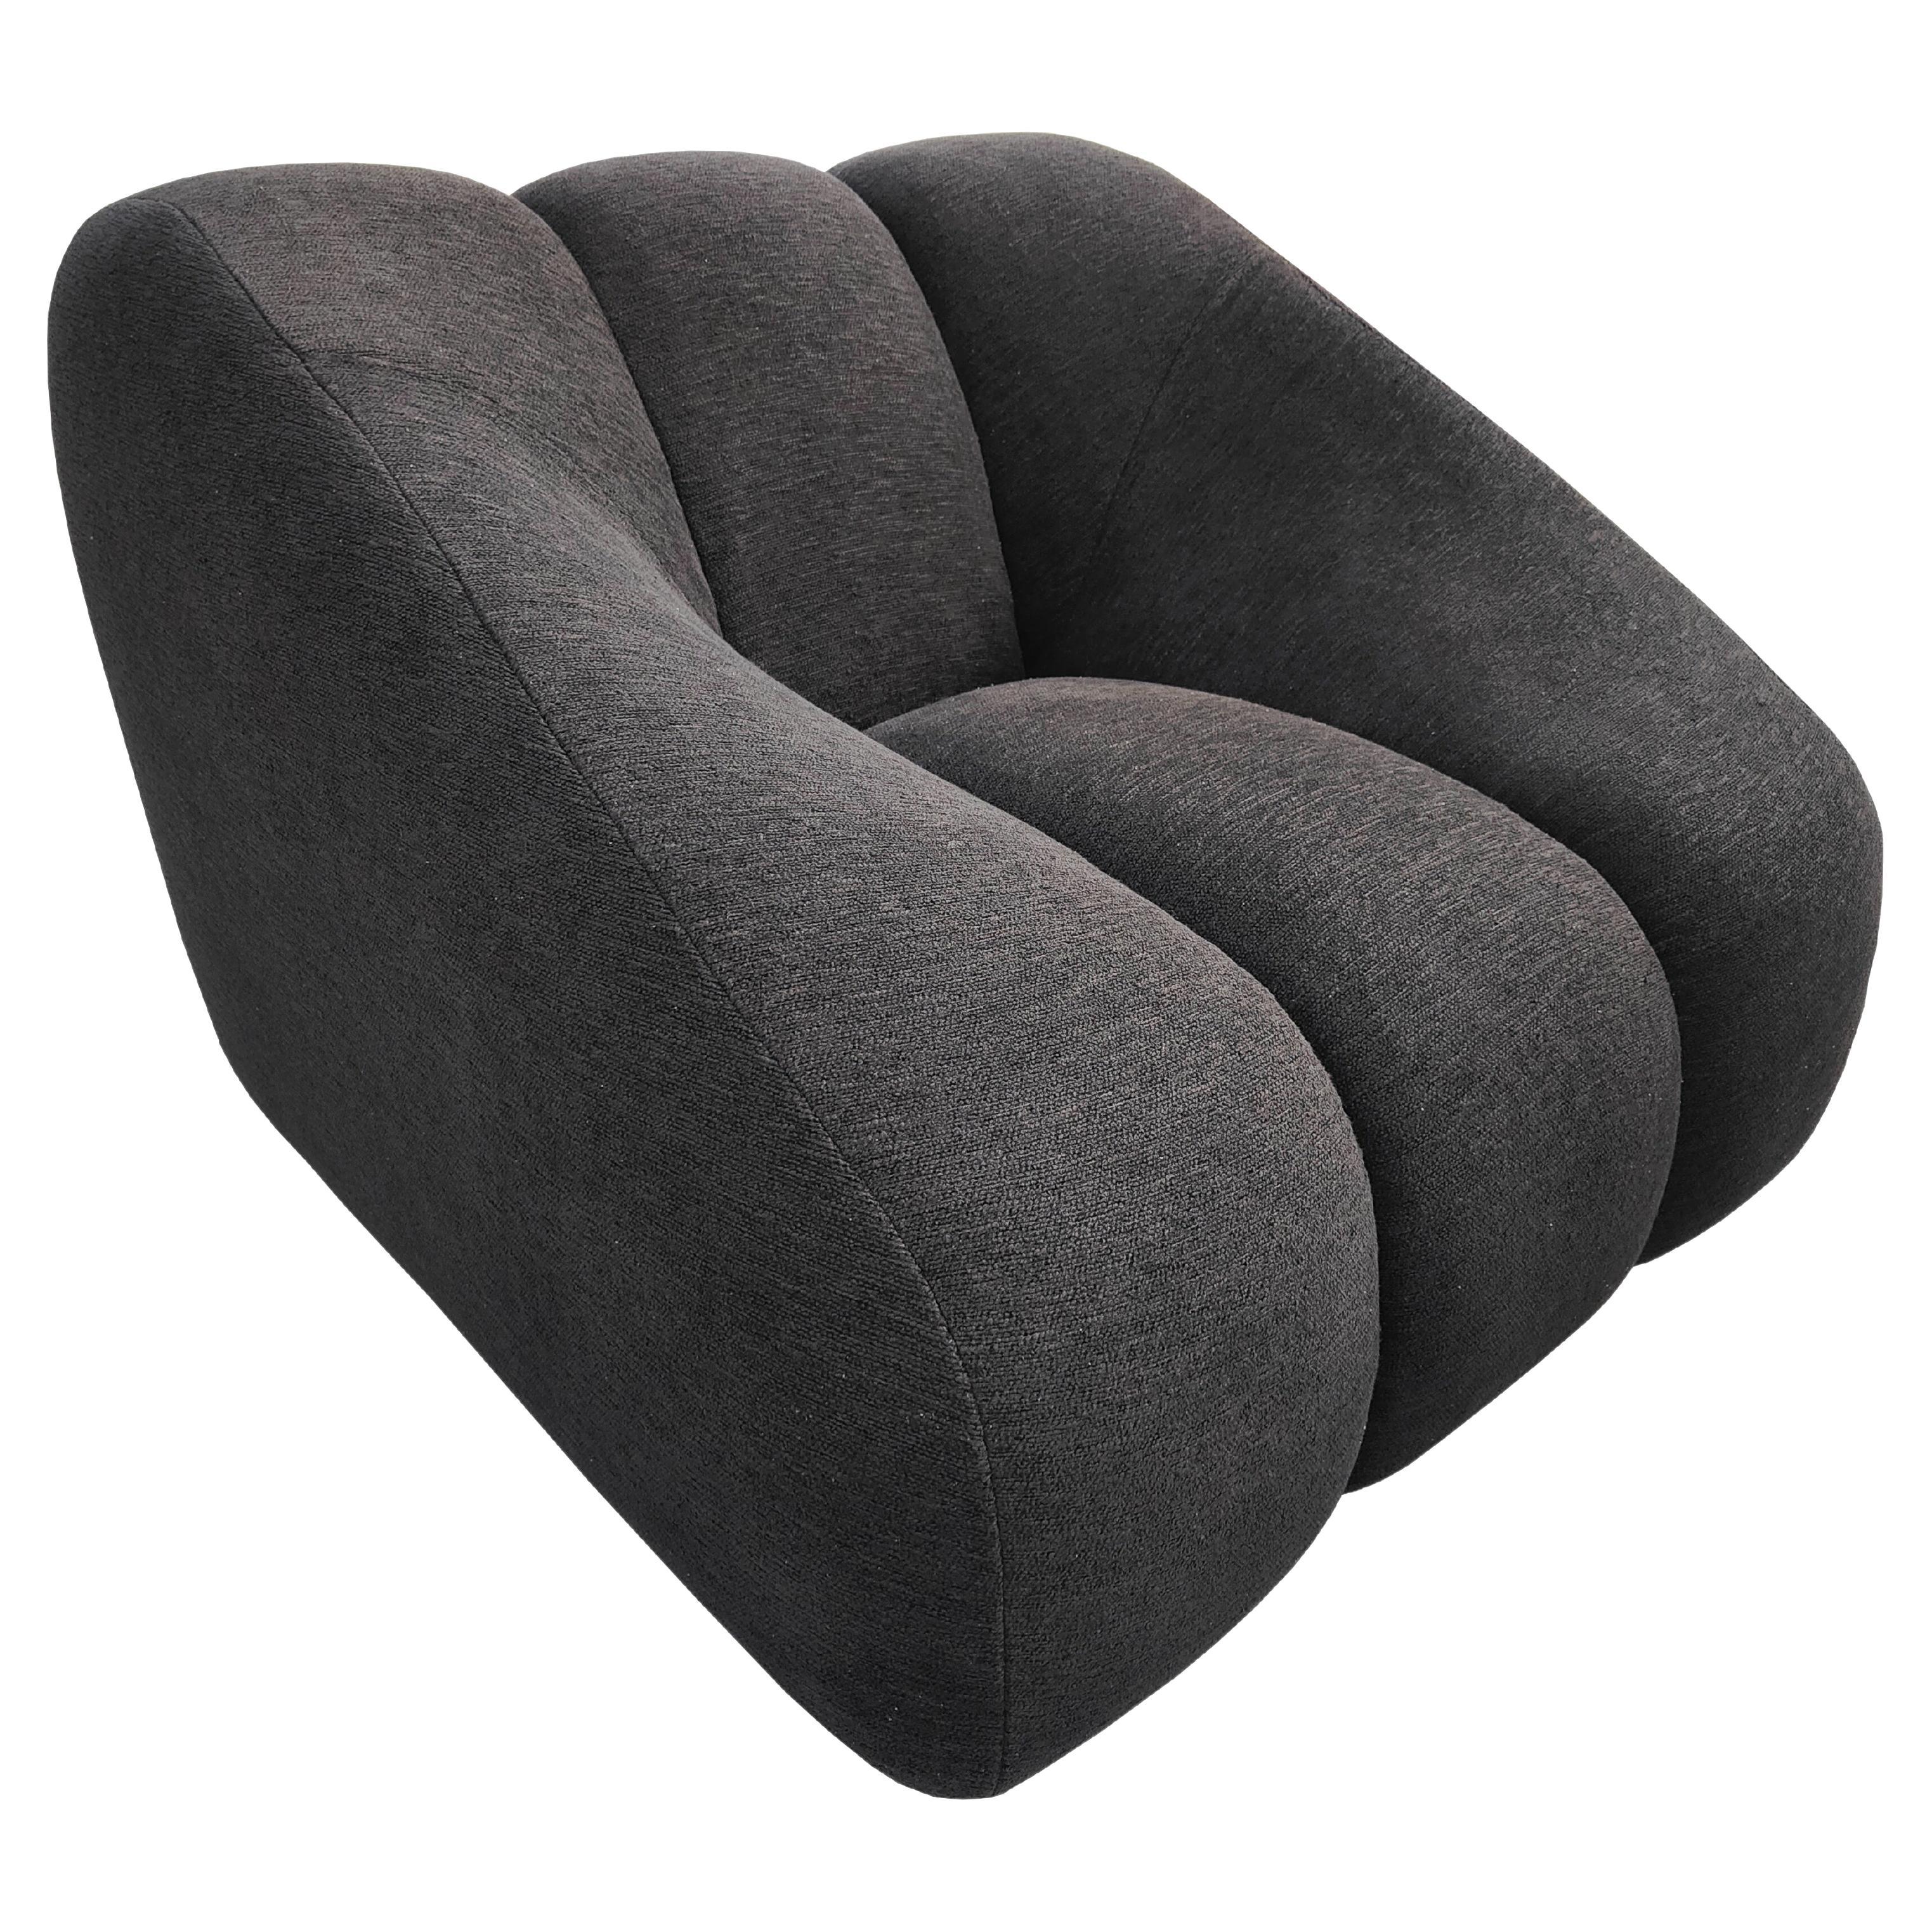 NEW armchair in black fabric. By Legame Italia For Sale